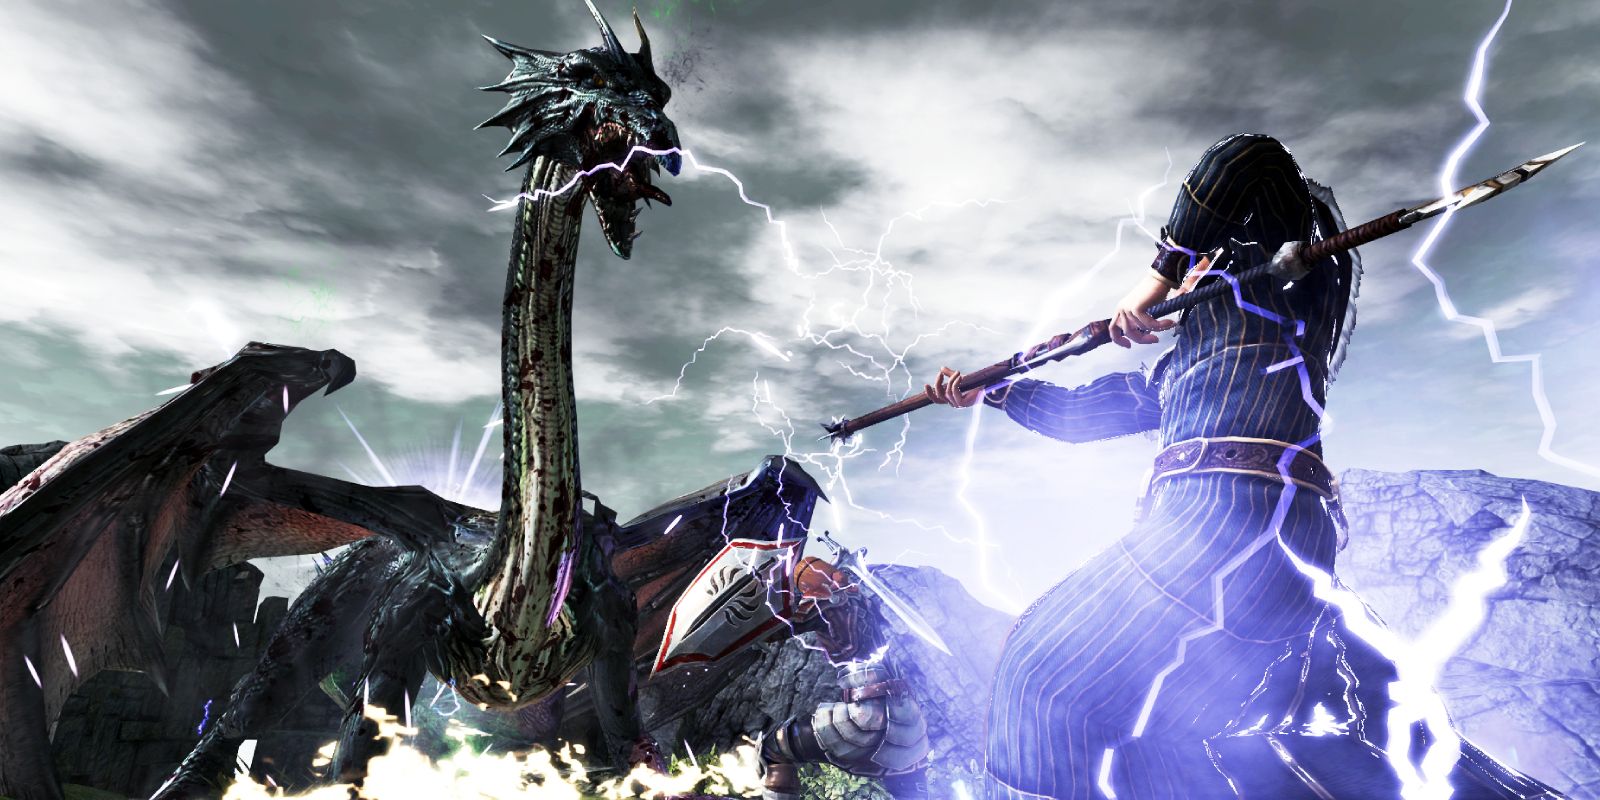 A character in Dragon Age 2 weilding a pole sword and lighting powers while facing off against some sort of wyvern creature